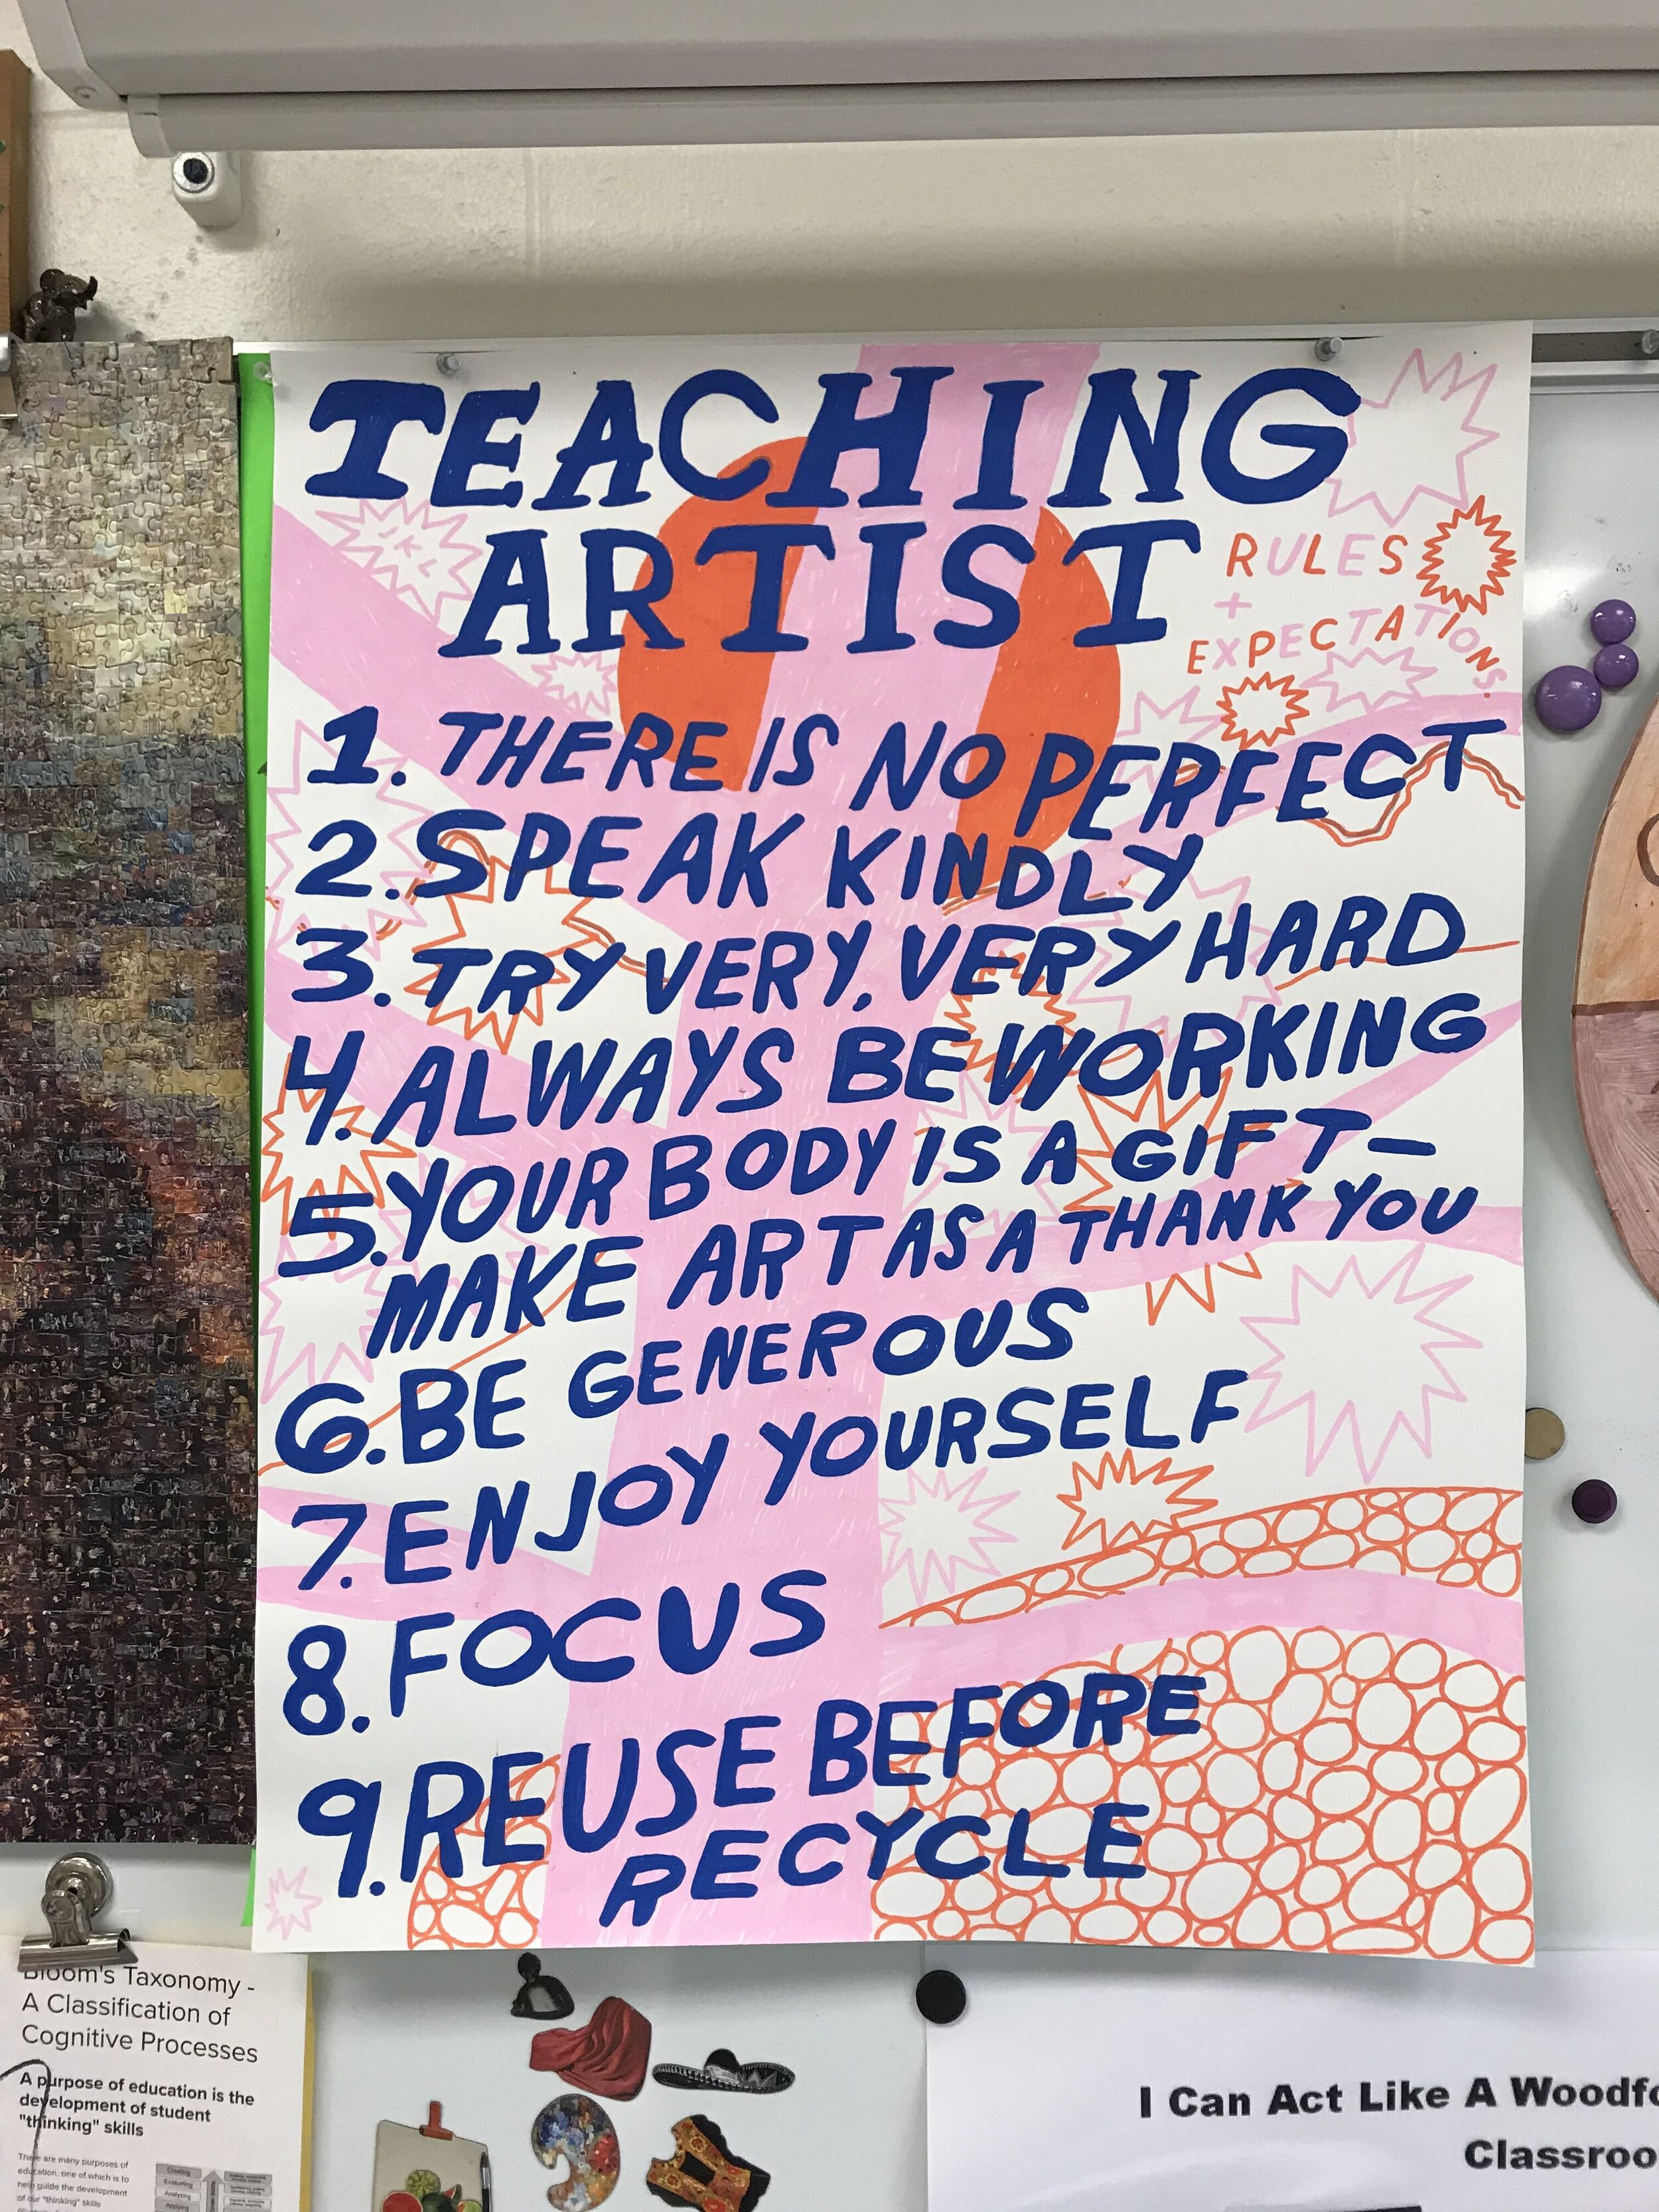 Teaching Artist Rules and Expectations